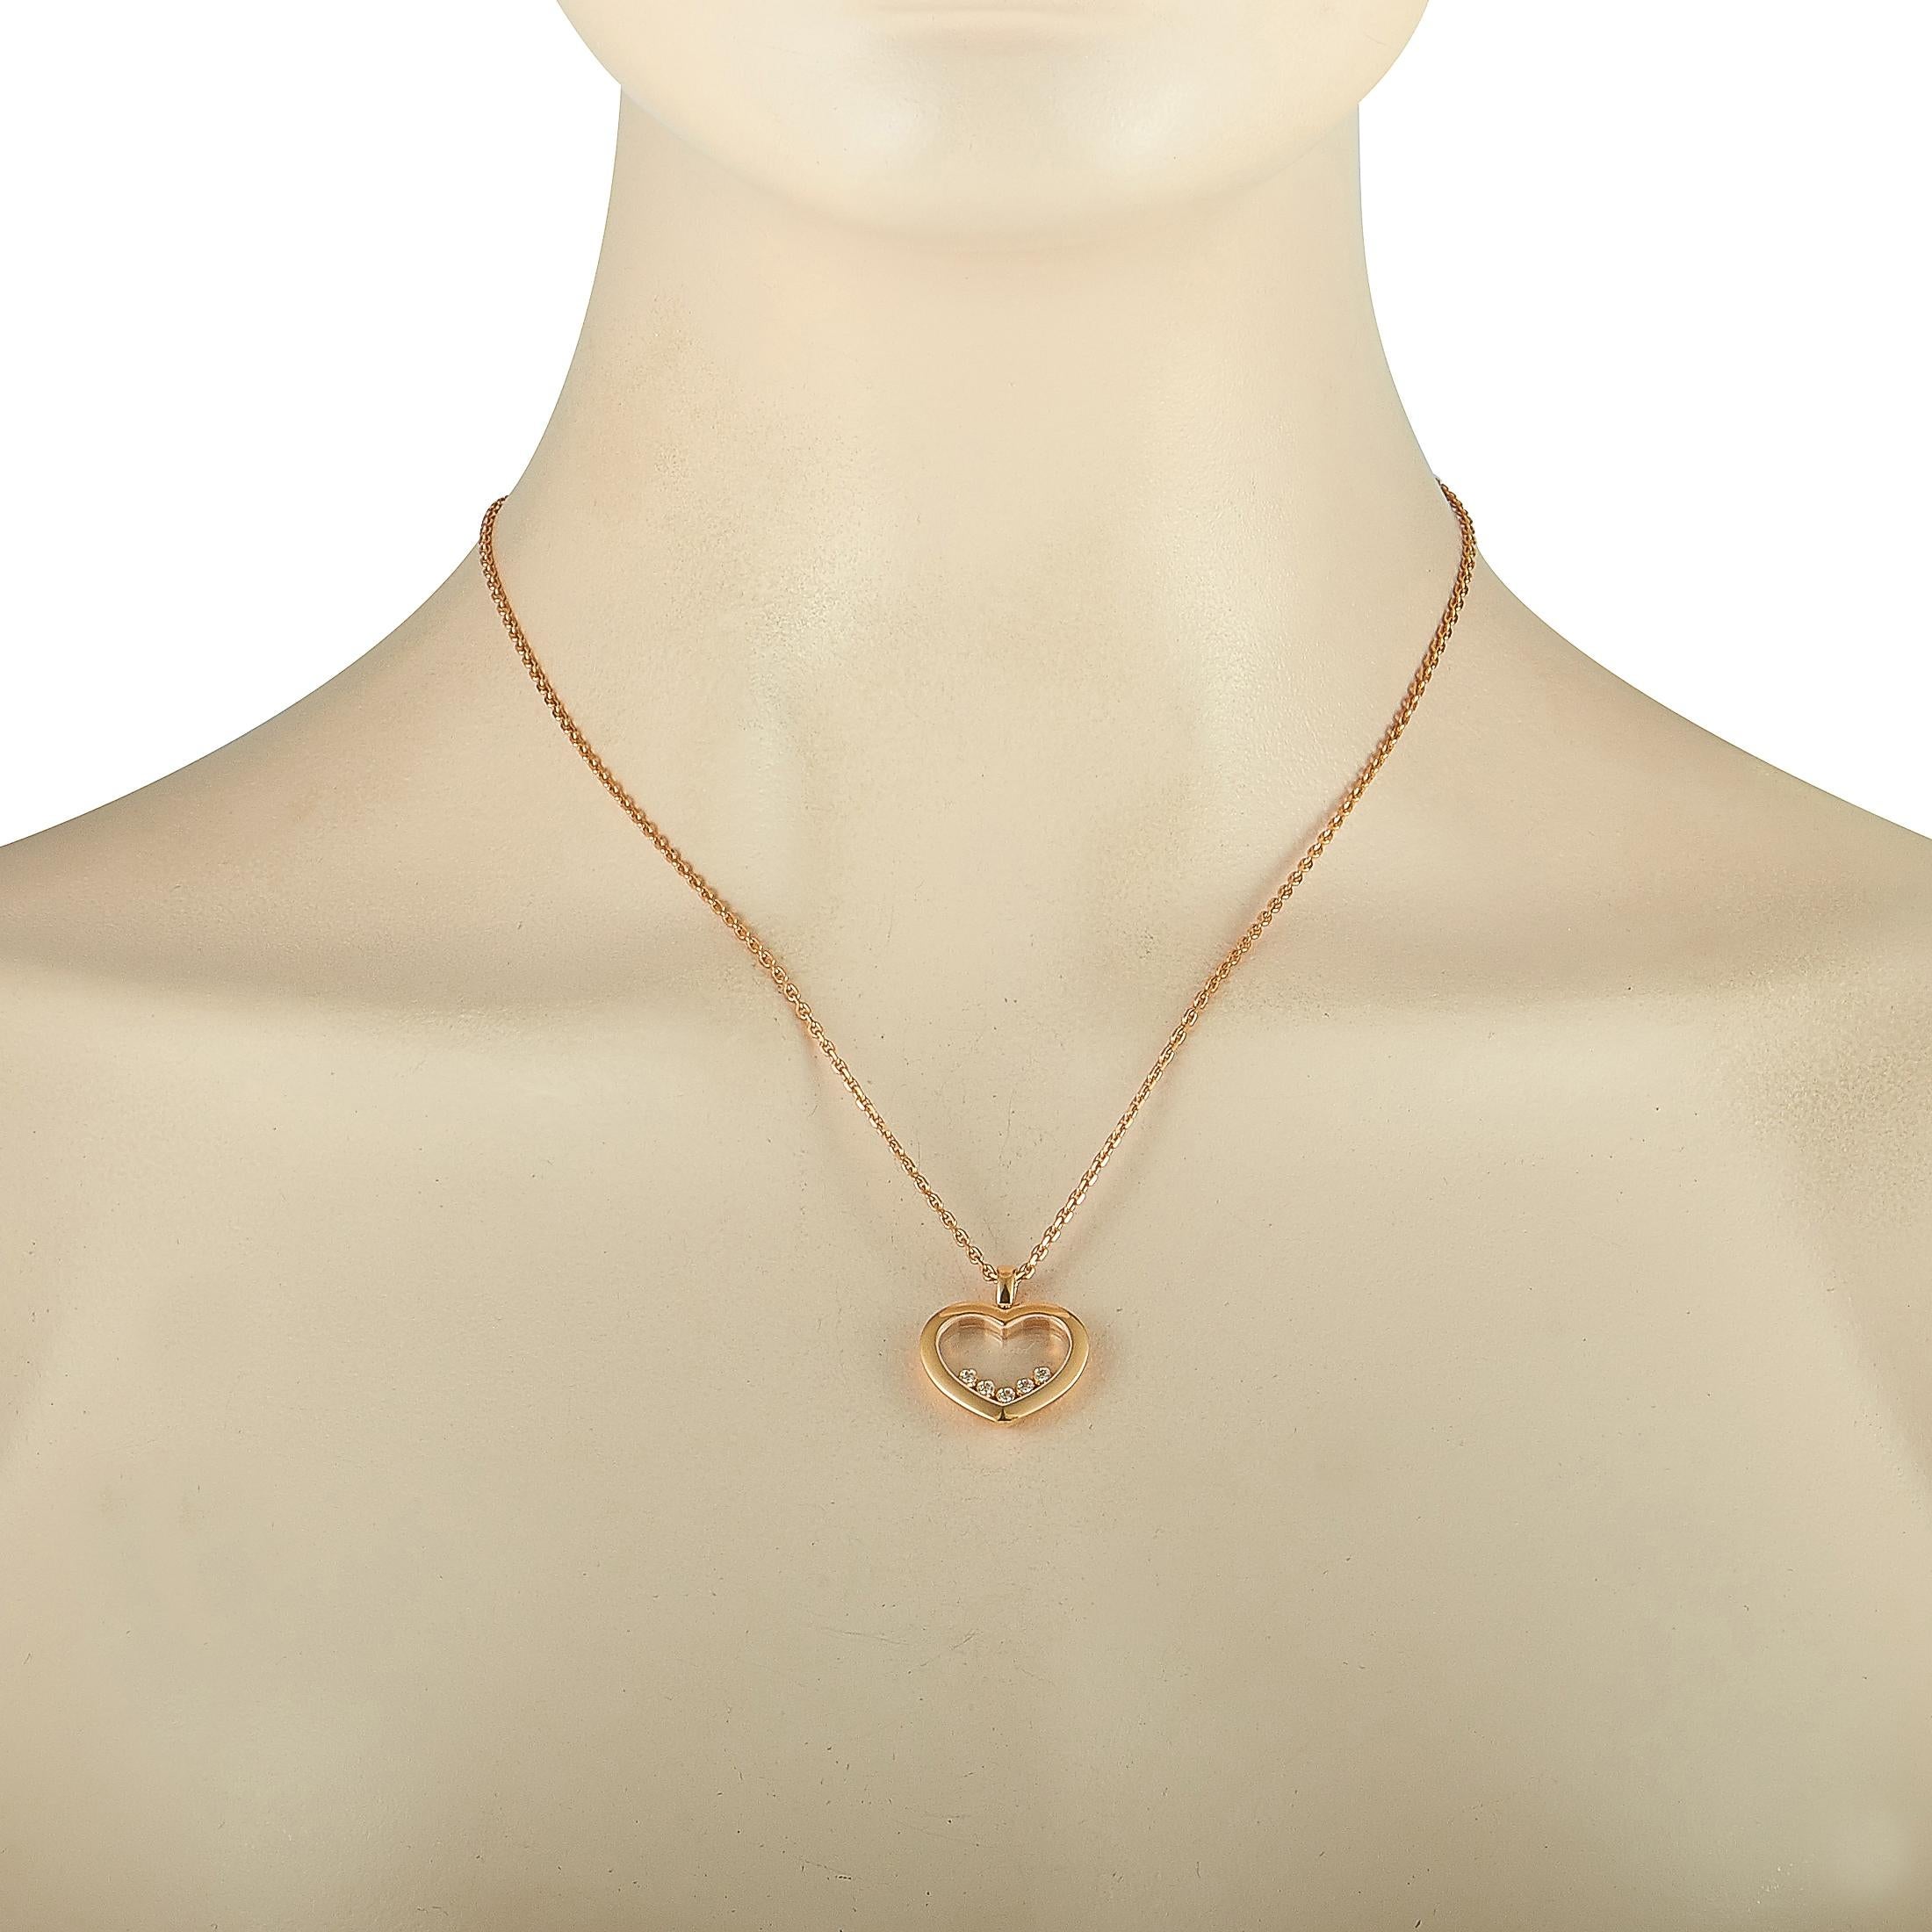 The Chopard “Happy Diamonds” necklace is made of 18K rose gold, boasting a 20” chain with lobster claw closure and a heart pendant that measures 0.87” in length and 0.80” in width. The necklace weighs 15.5 grams and features five floating diamond